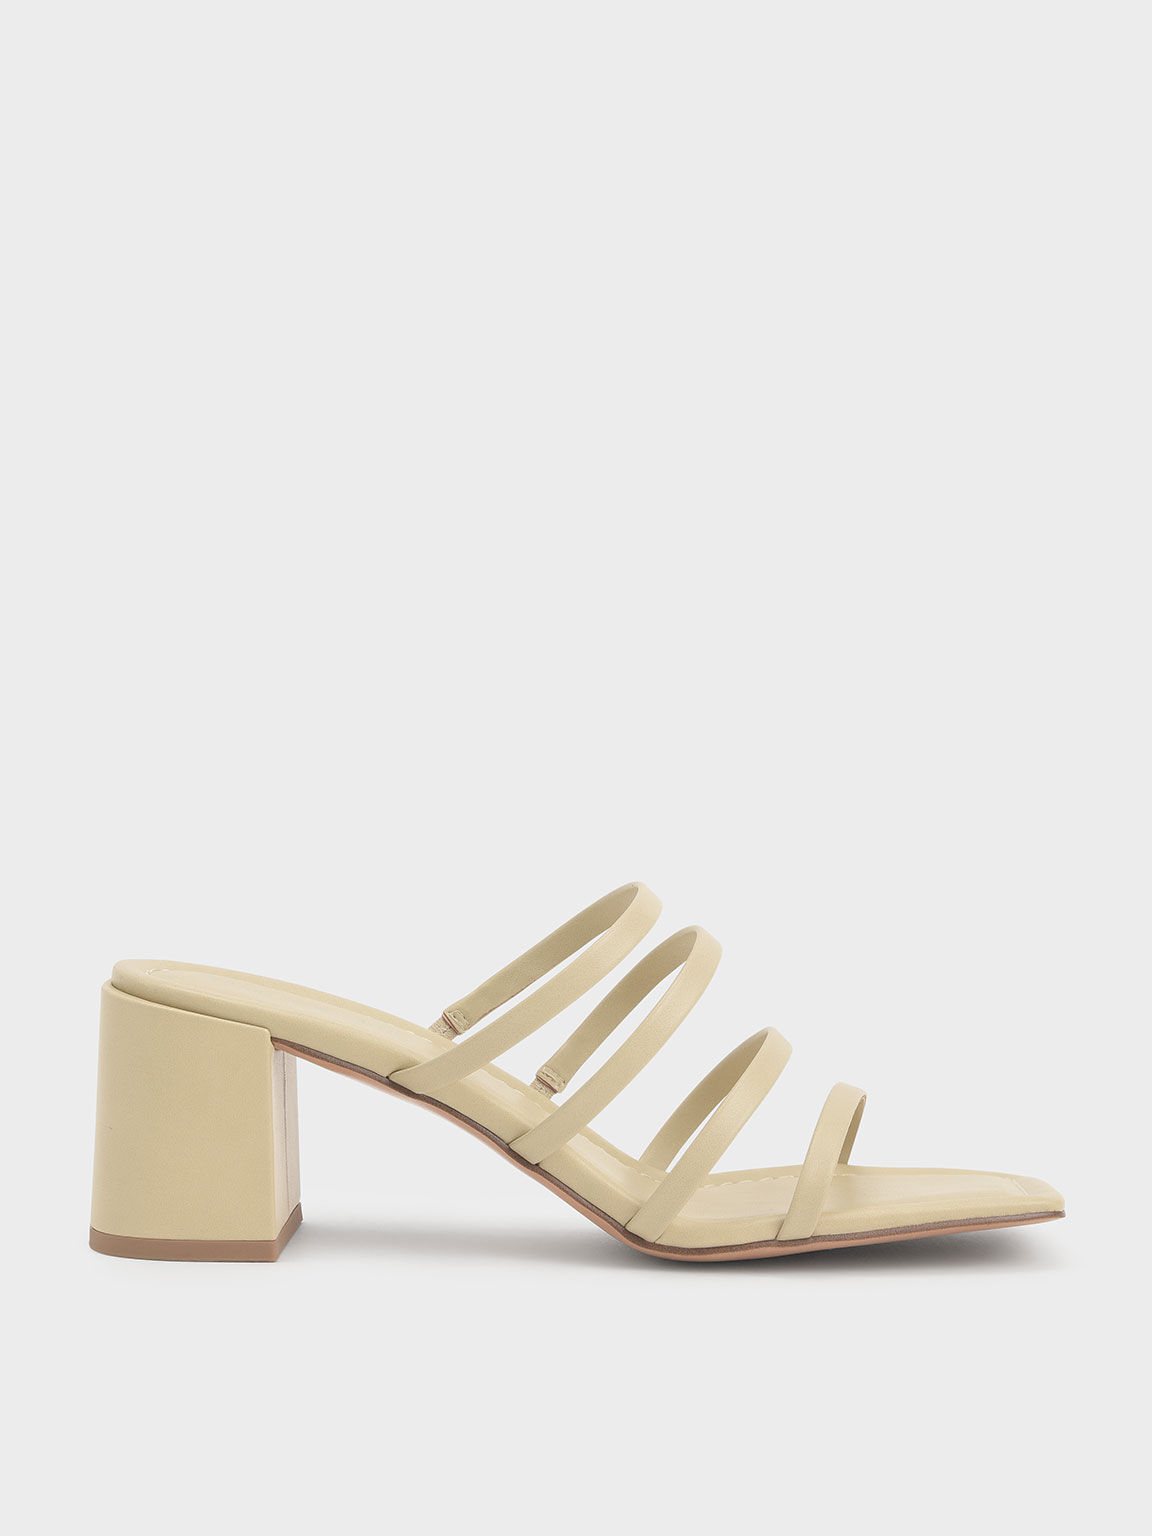 Strappy Square-Toe Heeled Mules, Sand, hi-res